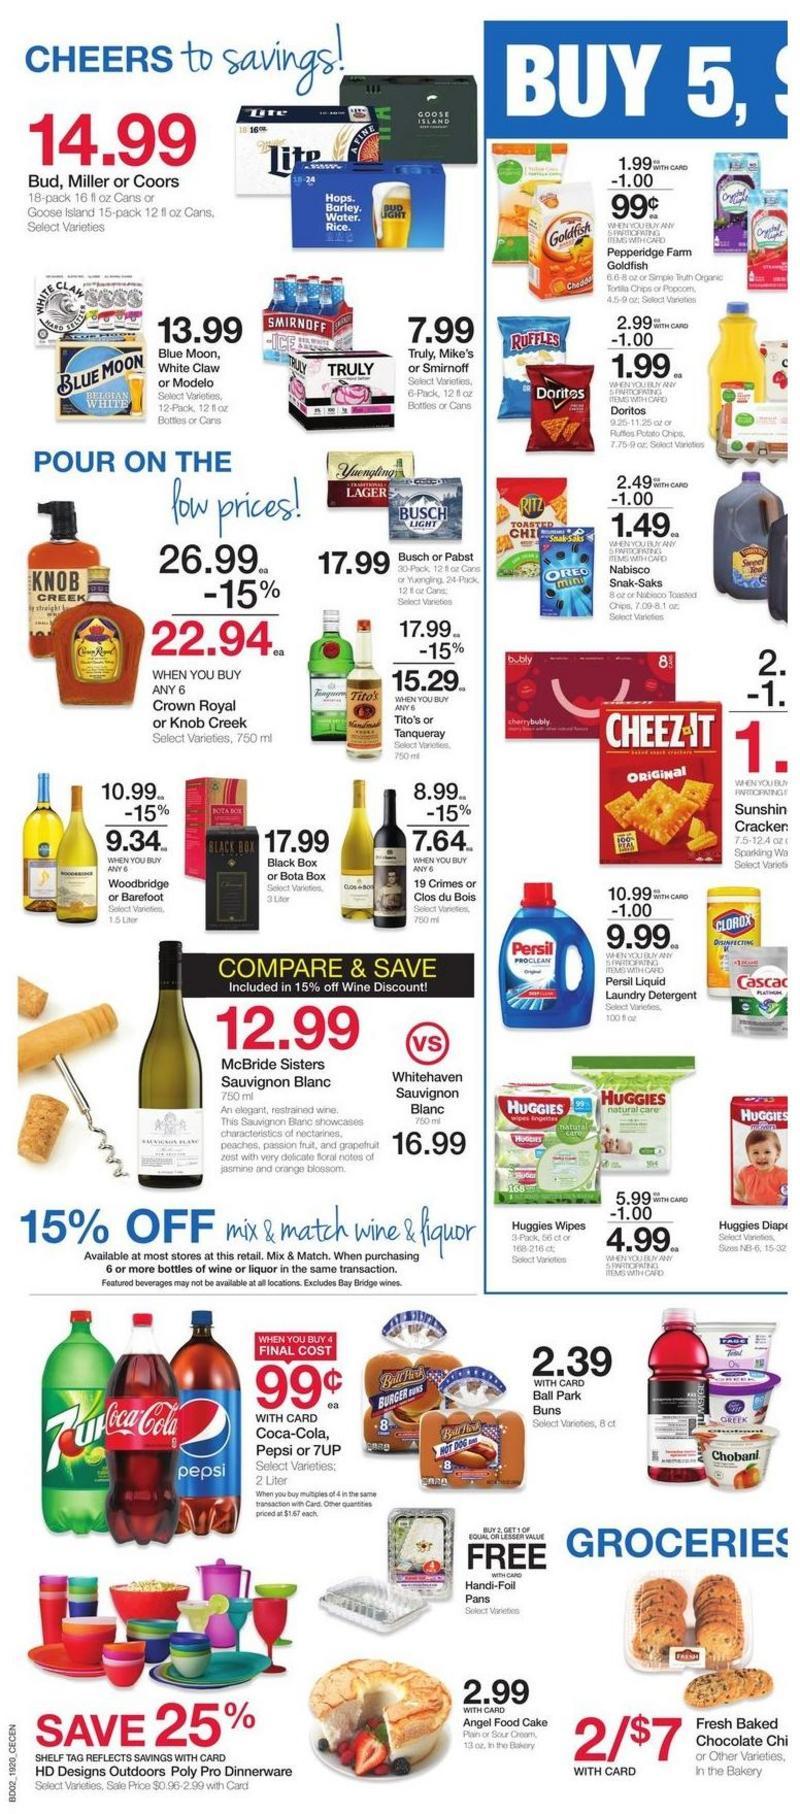 Kroger Weekly Ads & Special Buys from June 19 Page 2